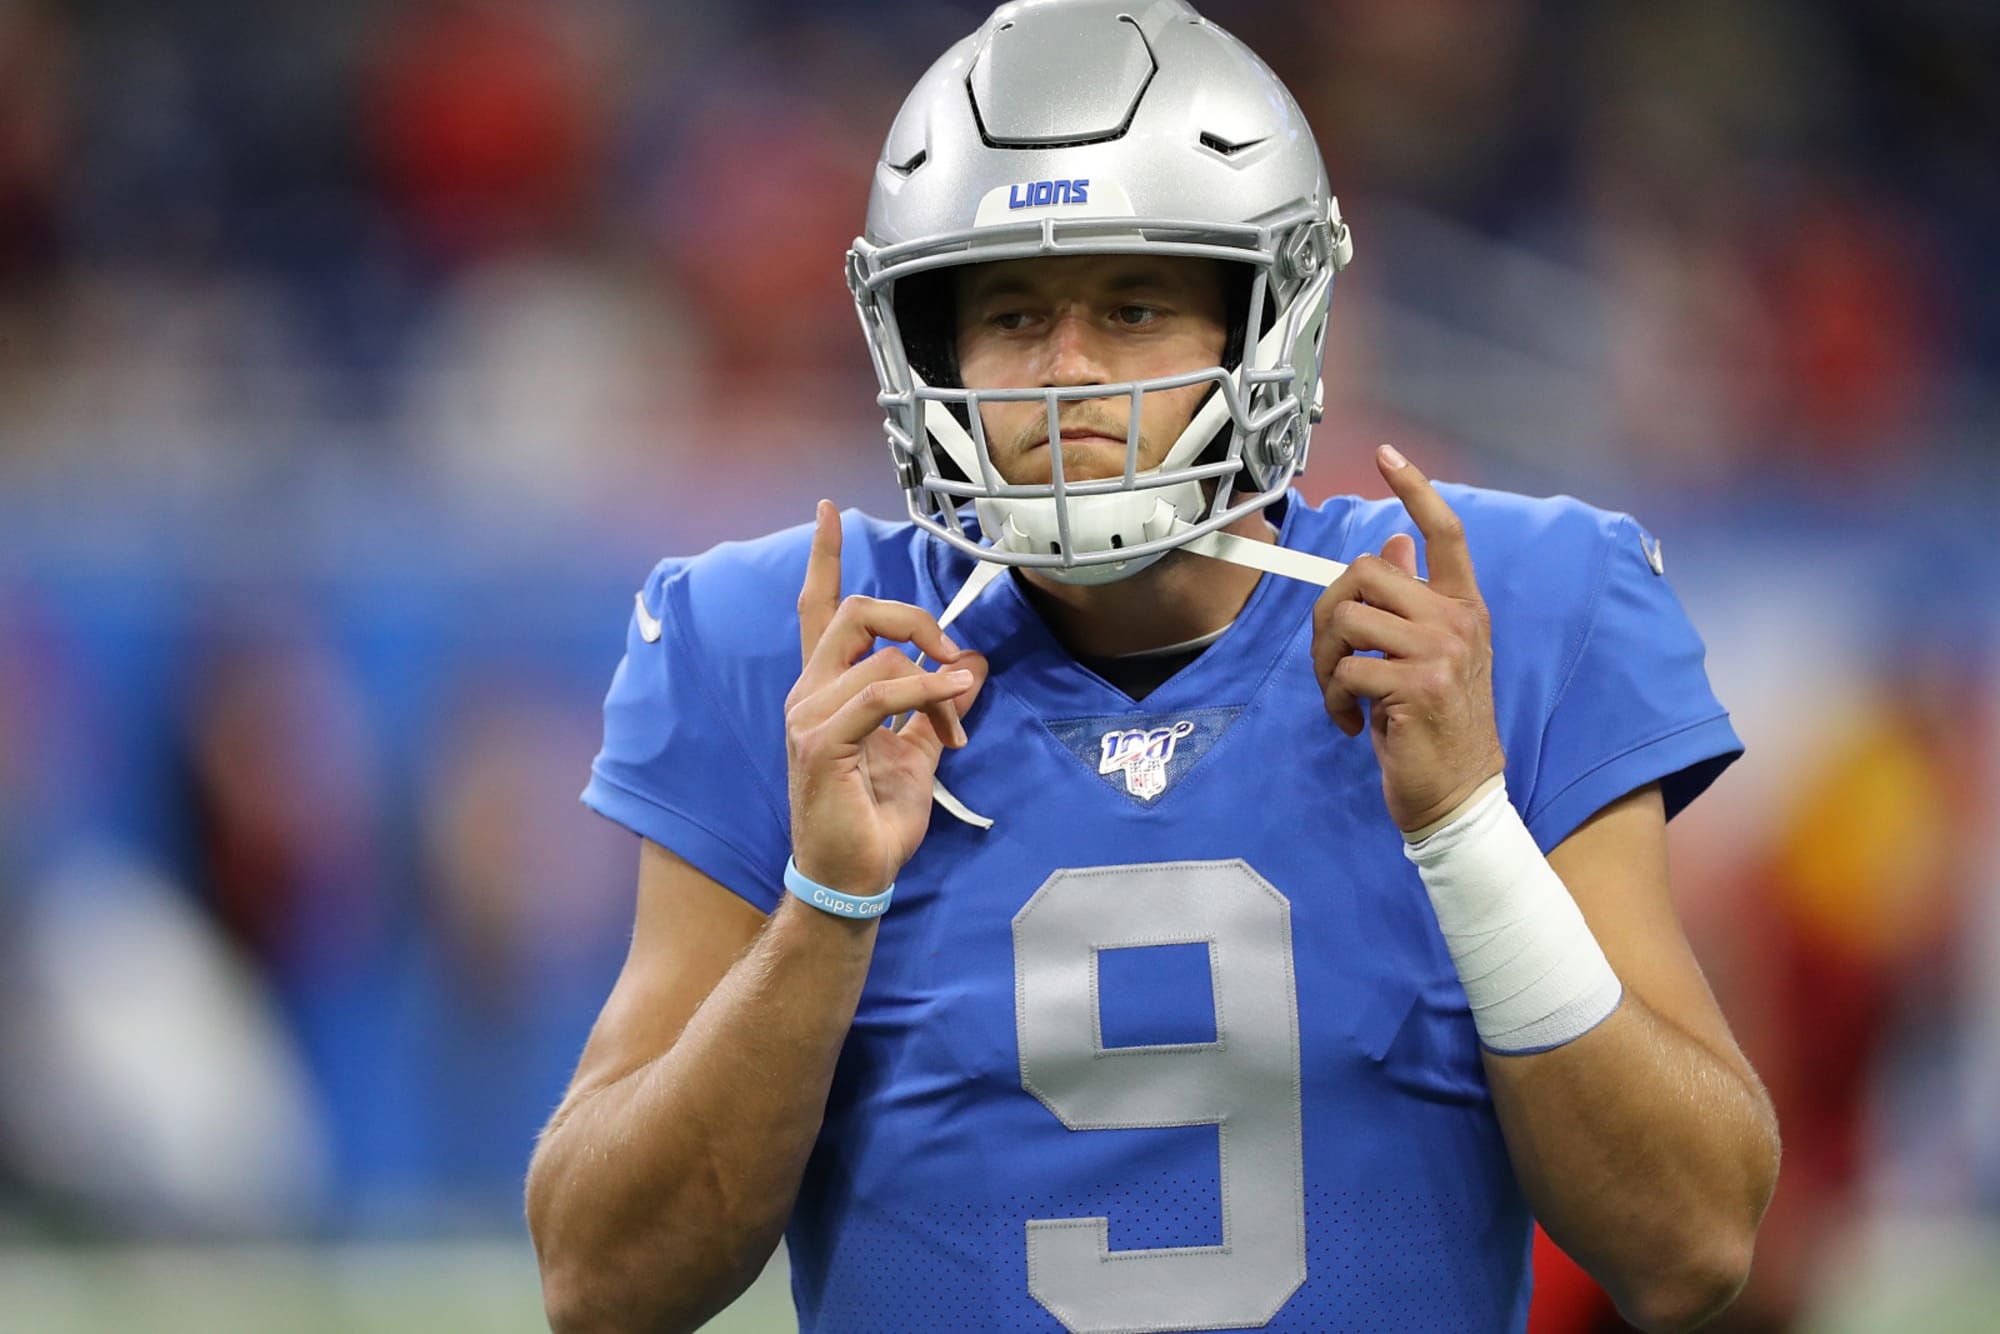 Matthew Stafford Finally Gets his Moment in the Spotlight